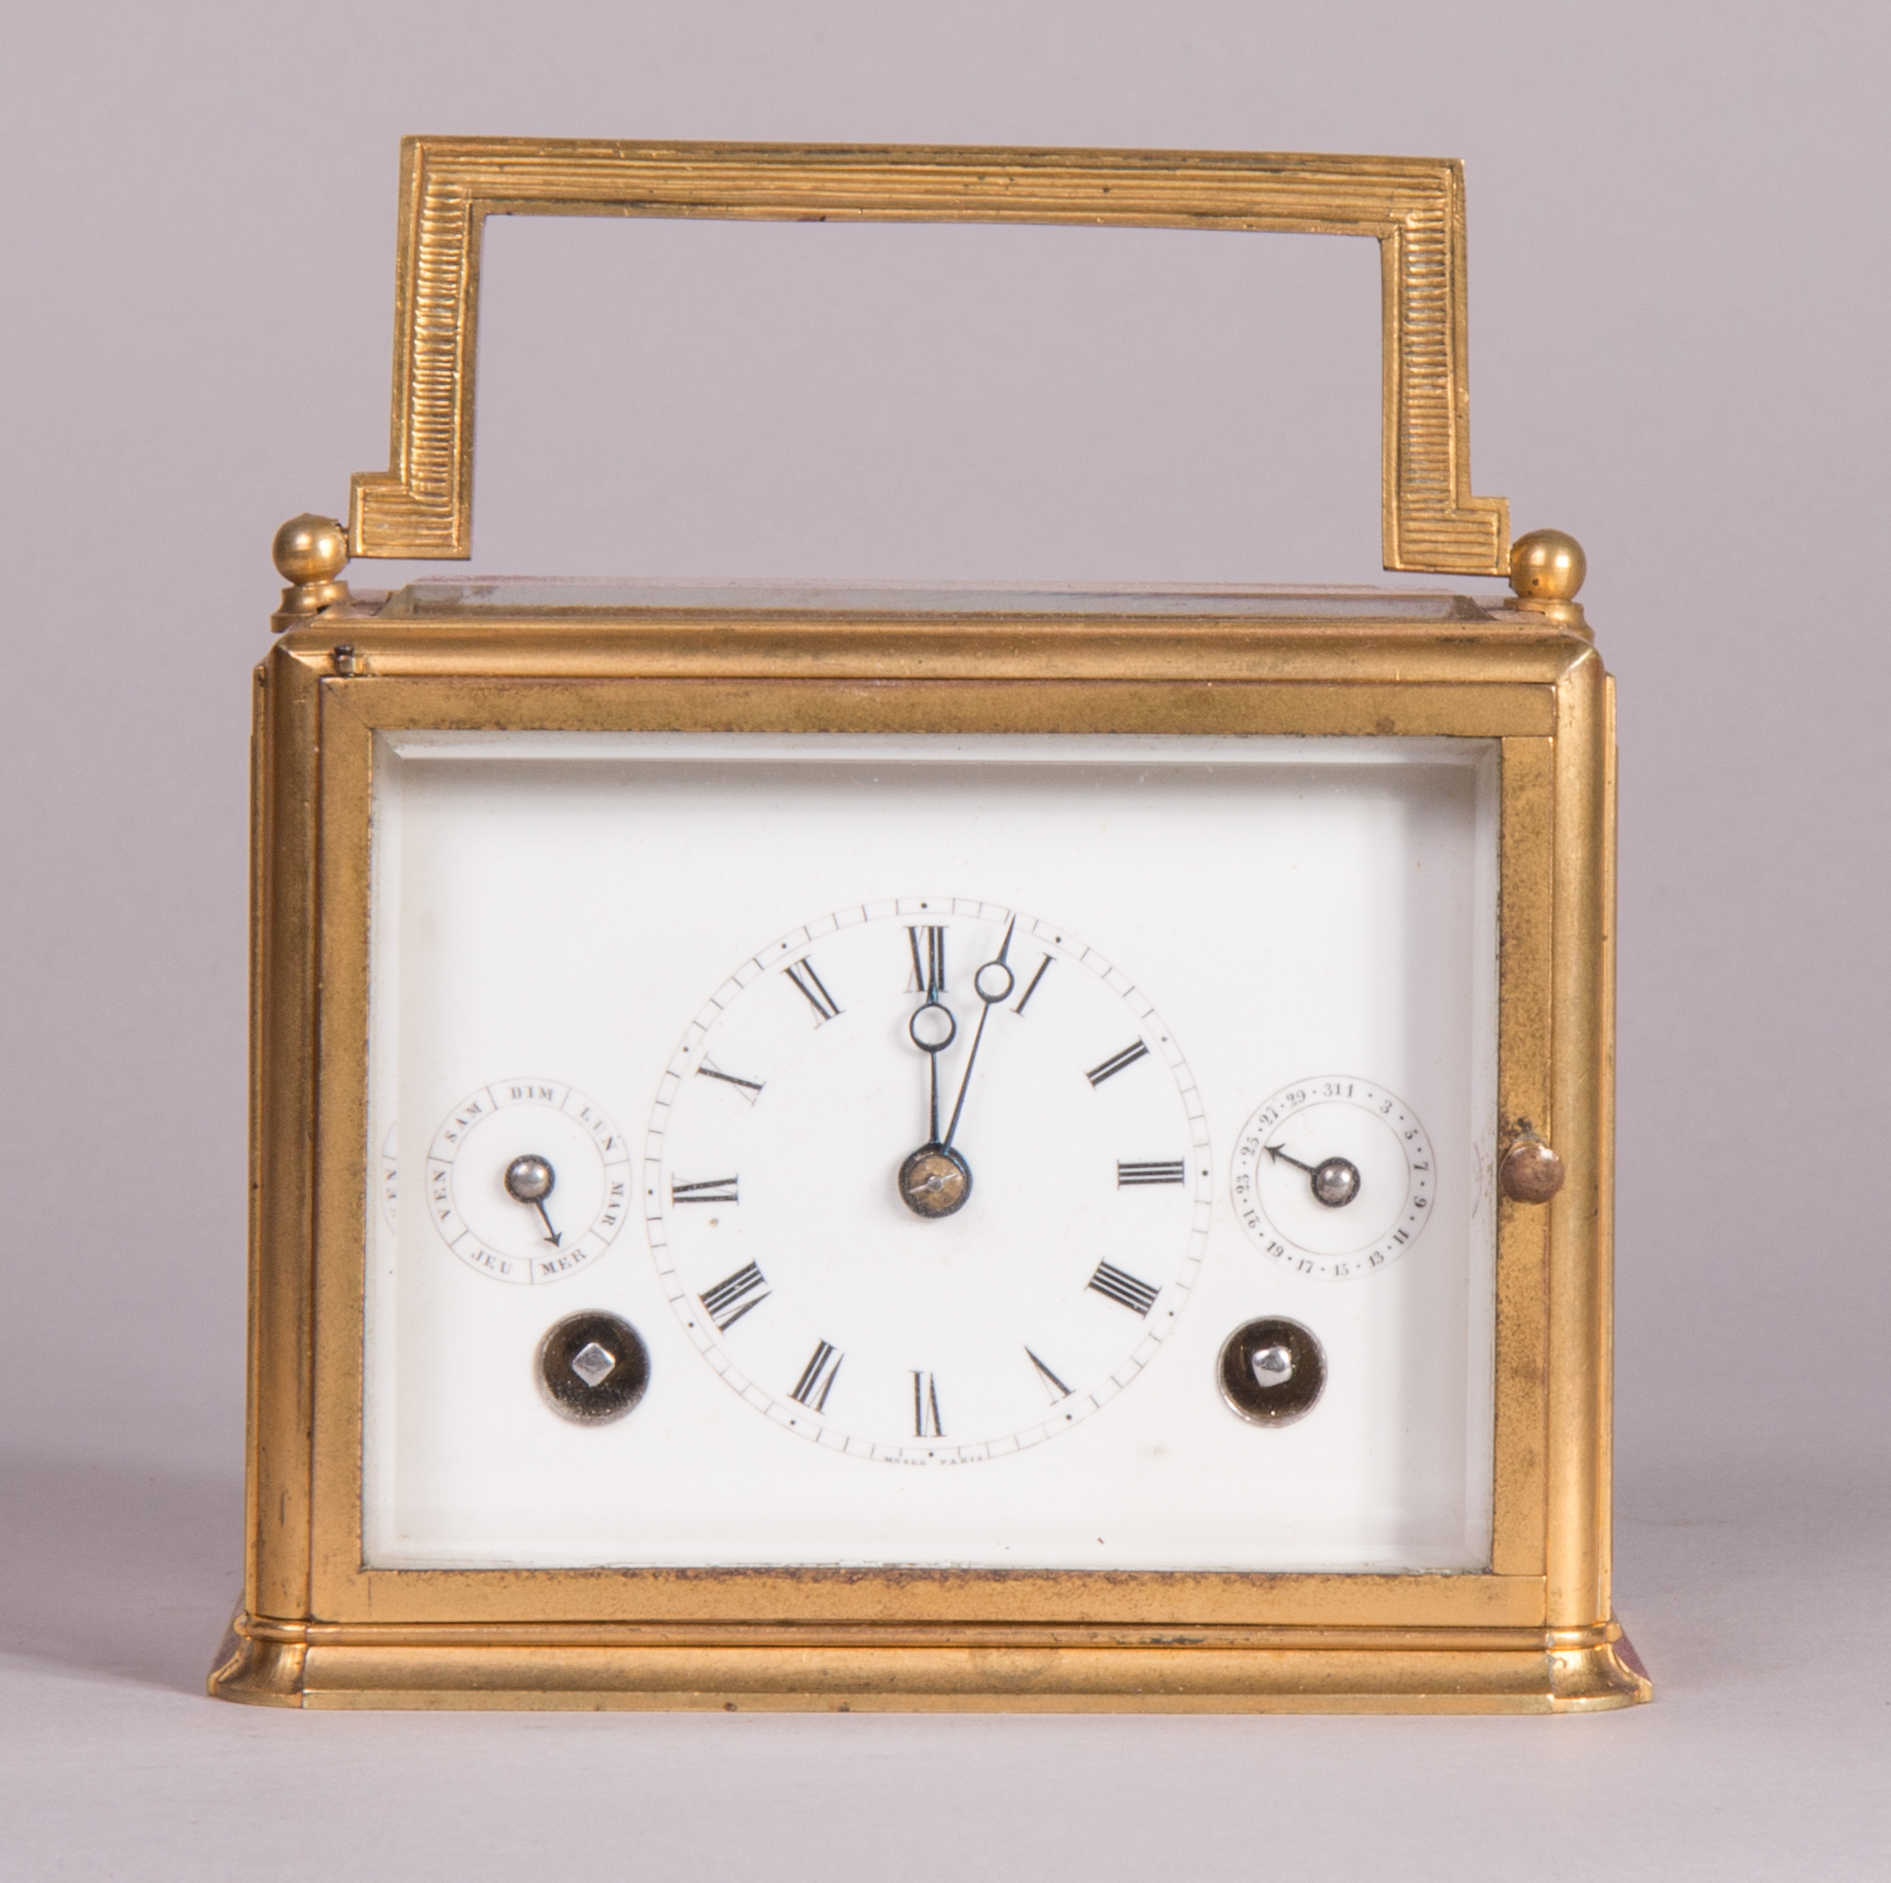 Carriage clock with original case by Heinrich Moser, c. 1850.